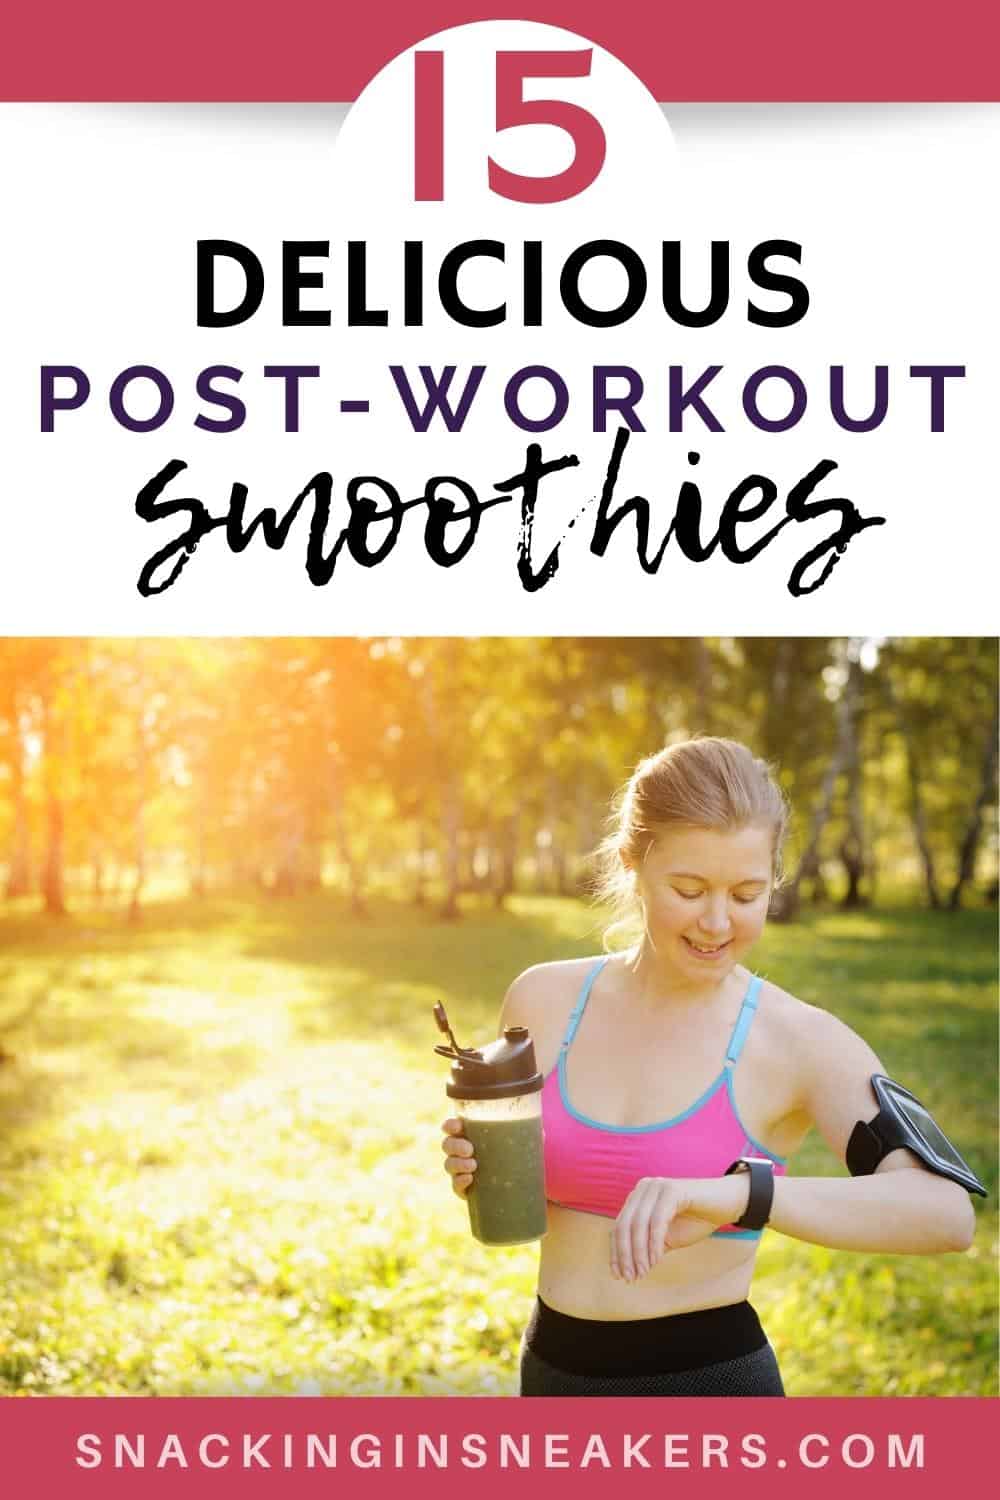 A woman drinking a smoothie, with a text overlay that says 15 delicious post workout smoothies.